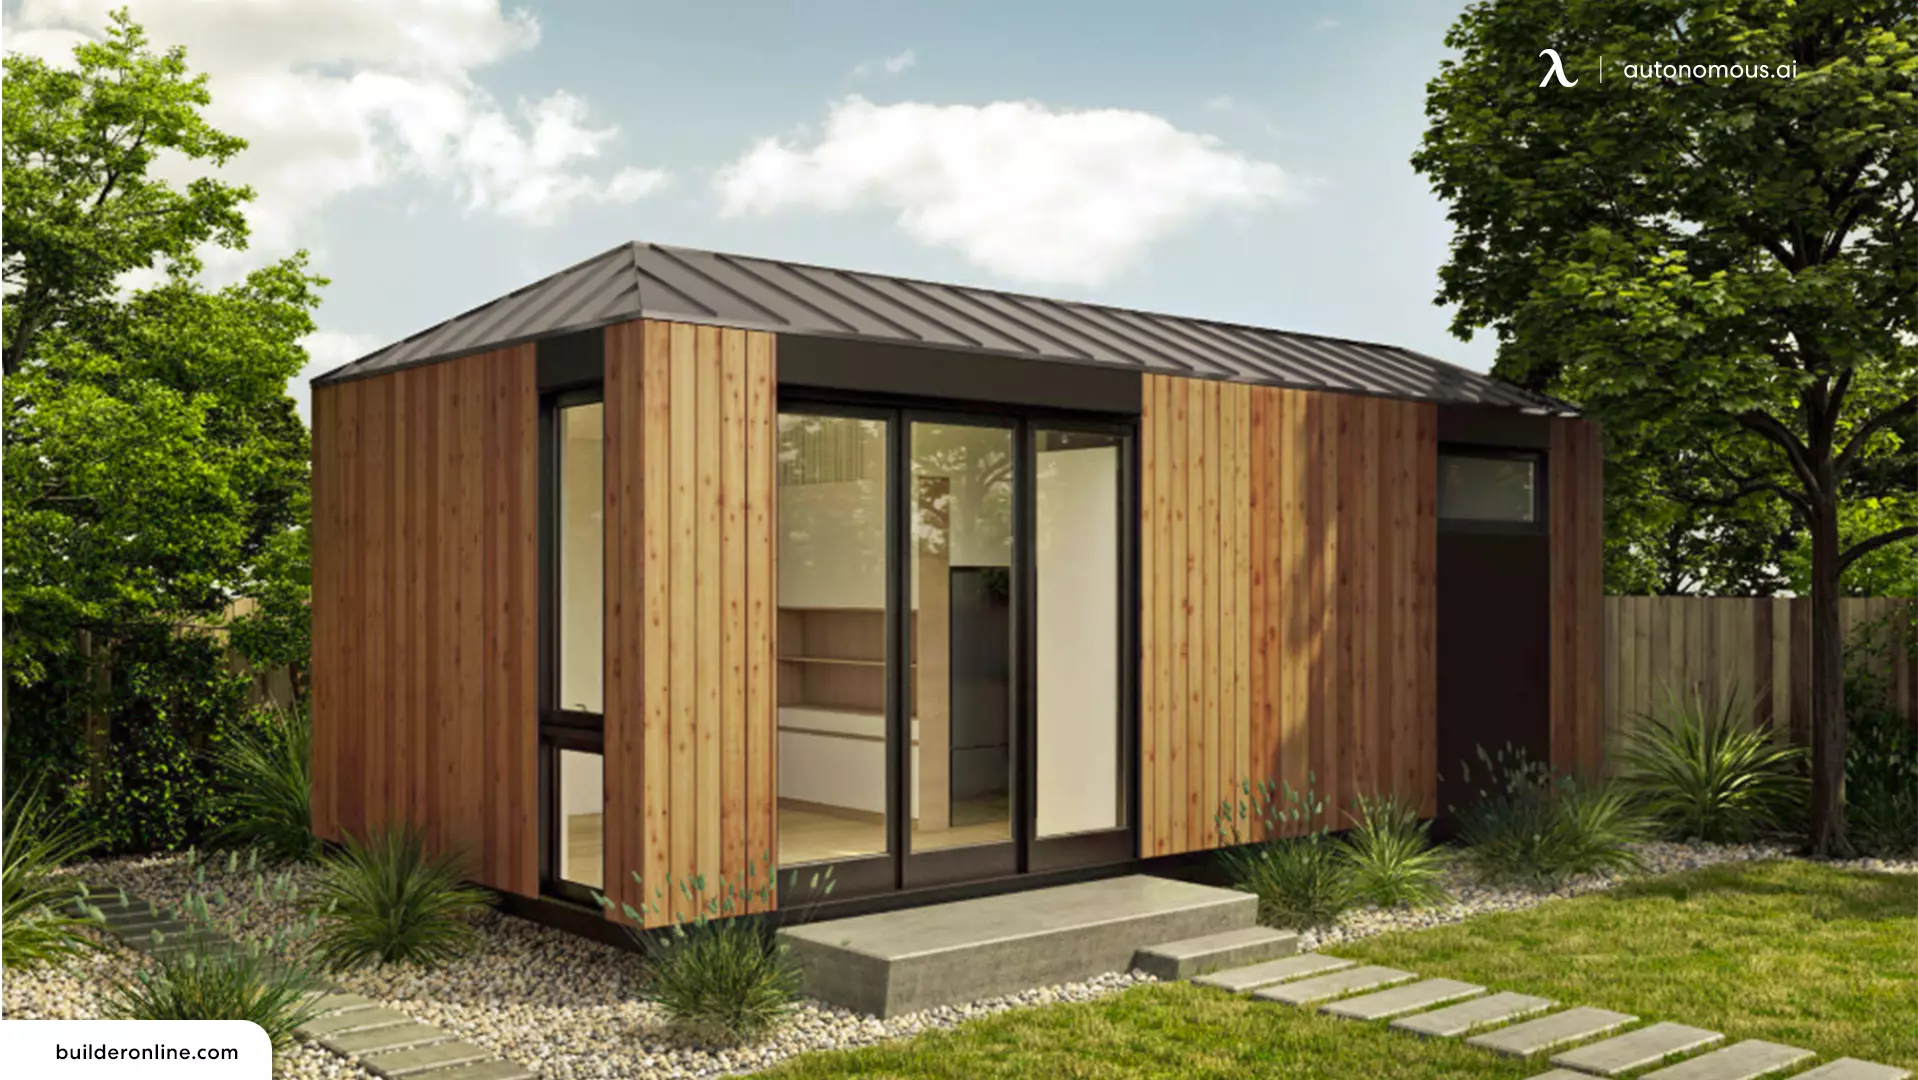 What Are the Benefits of a Prefab ADU?